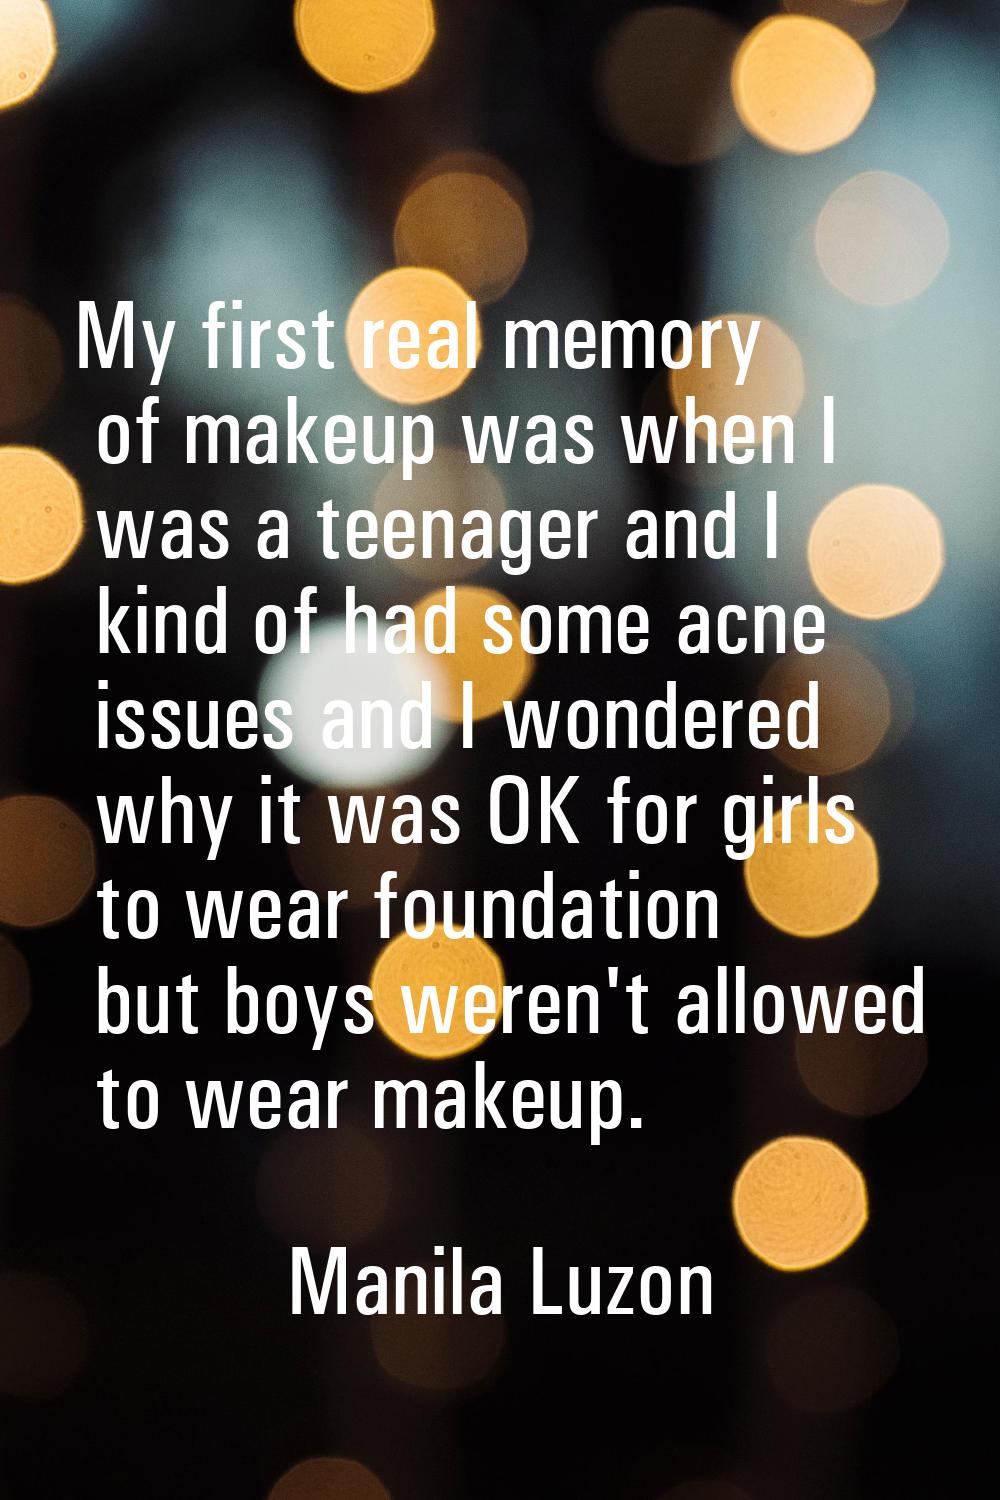 My first real memory of makeup was when I was a teenager and I kind of had some acne issues and I w